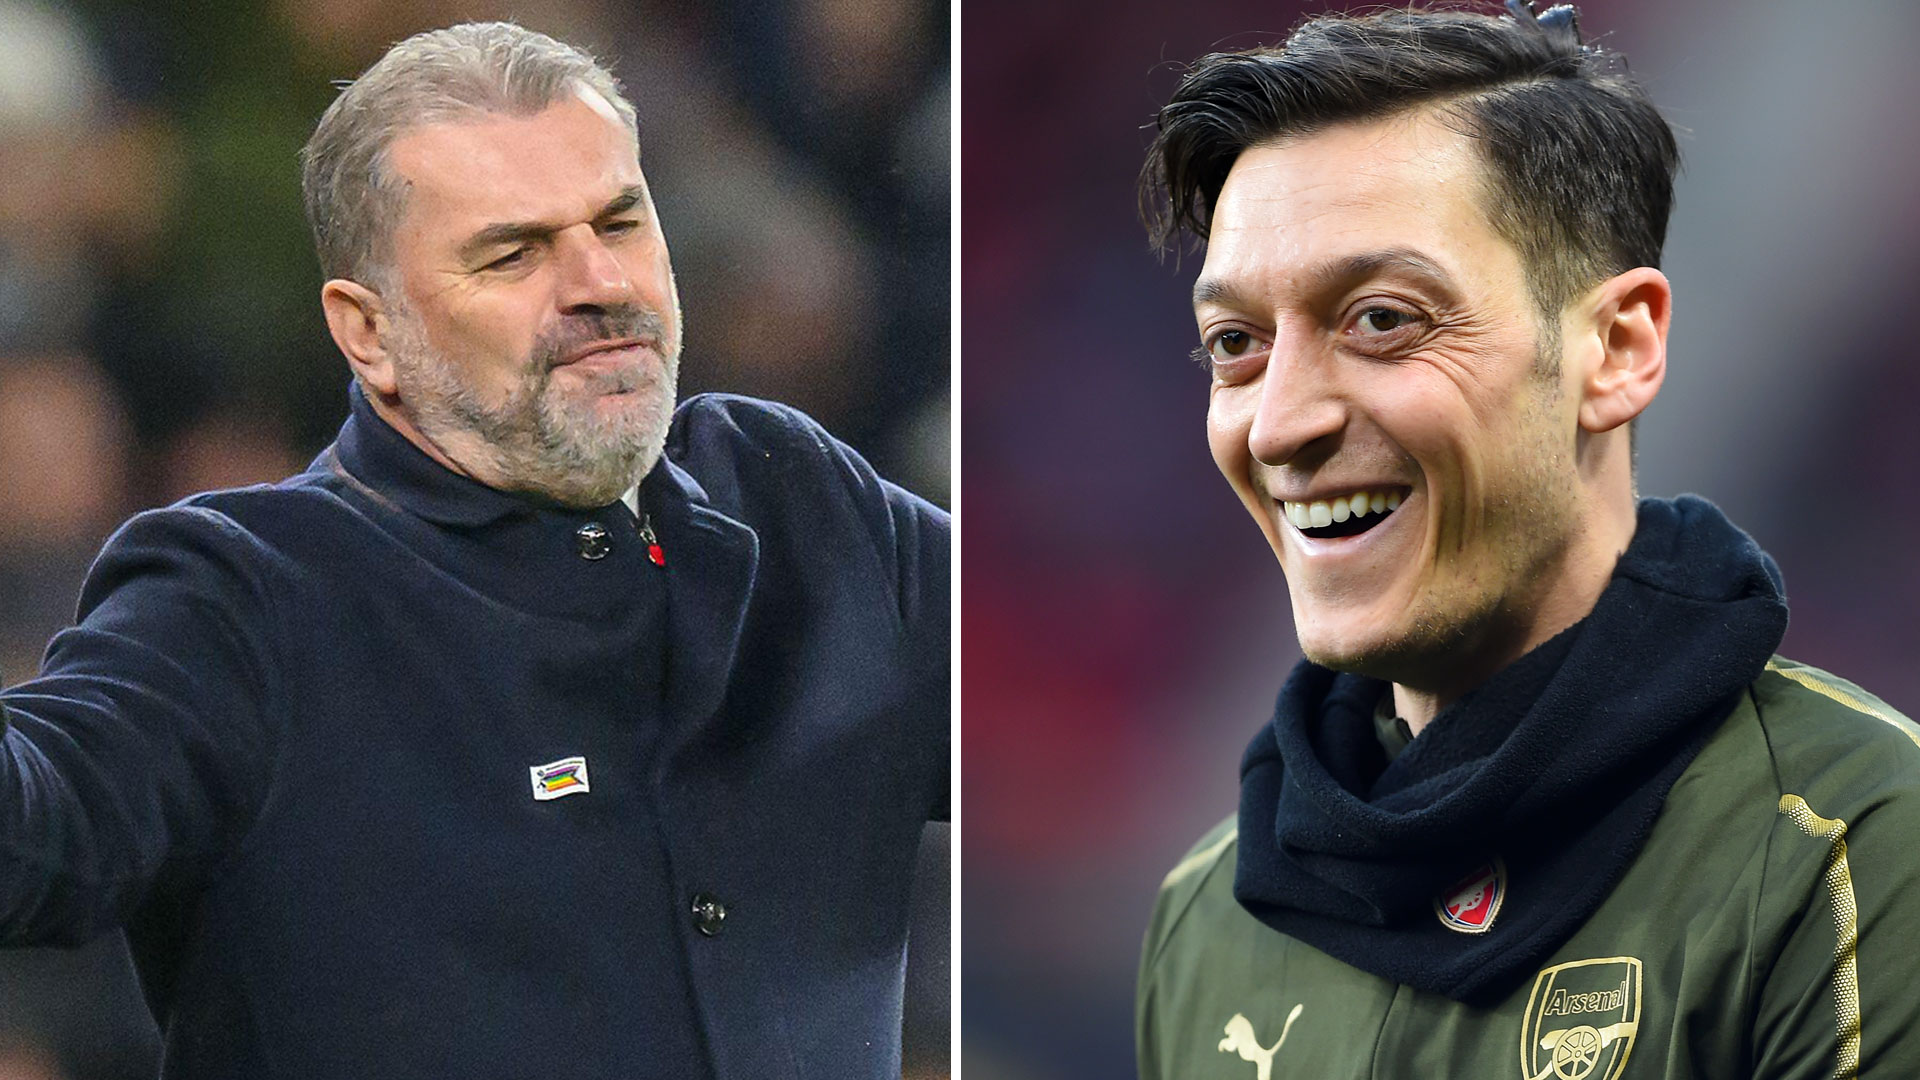 Arsenal fans 'have to check Mesut Ozil's Twitter account is real' after savage tweet about Tottenham